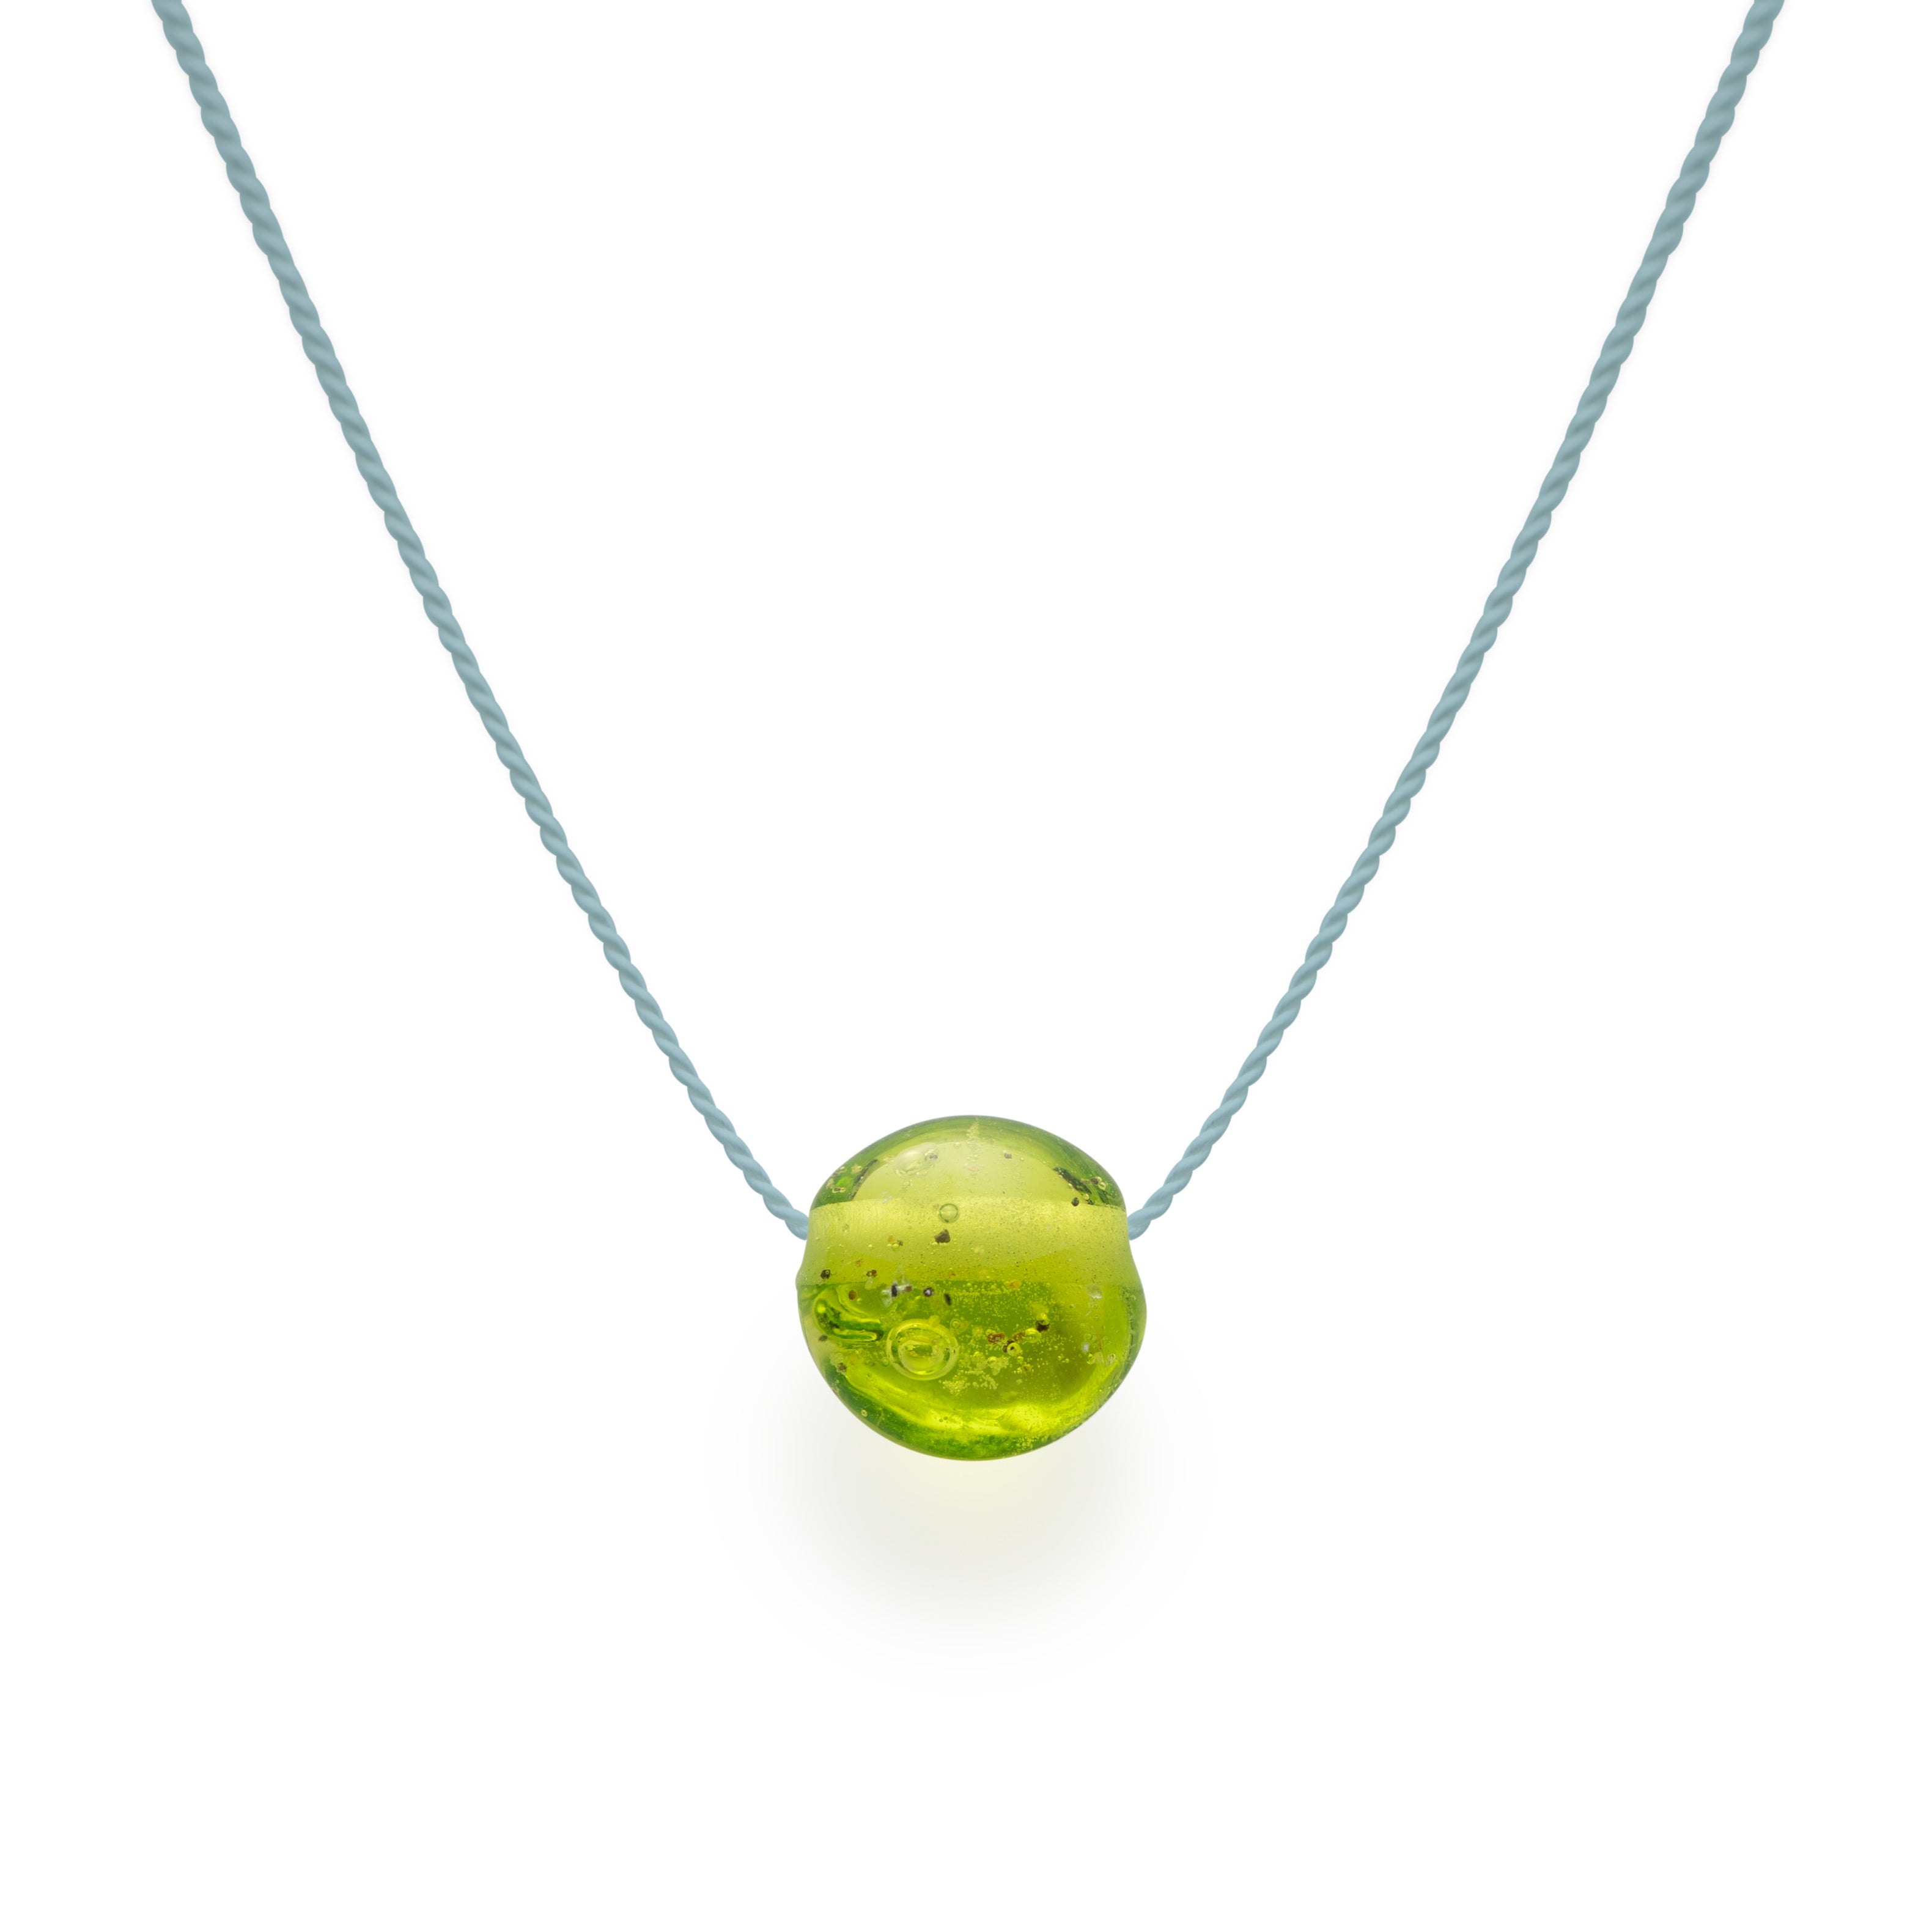 Sand Pebble Necklace - Apple Green